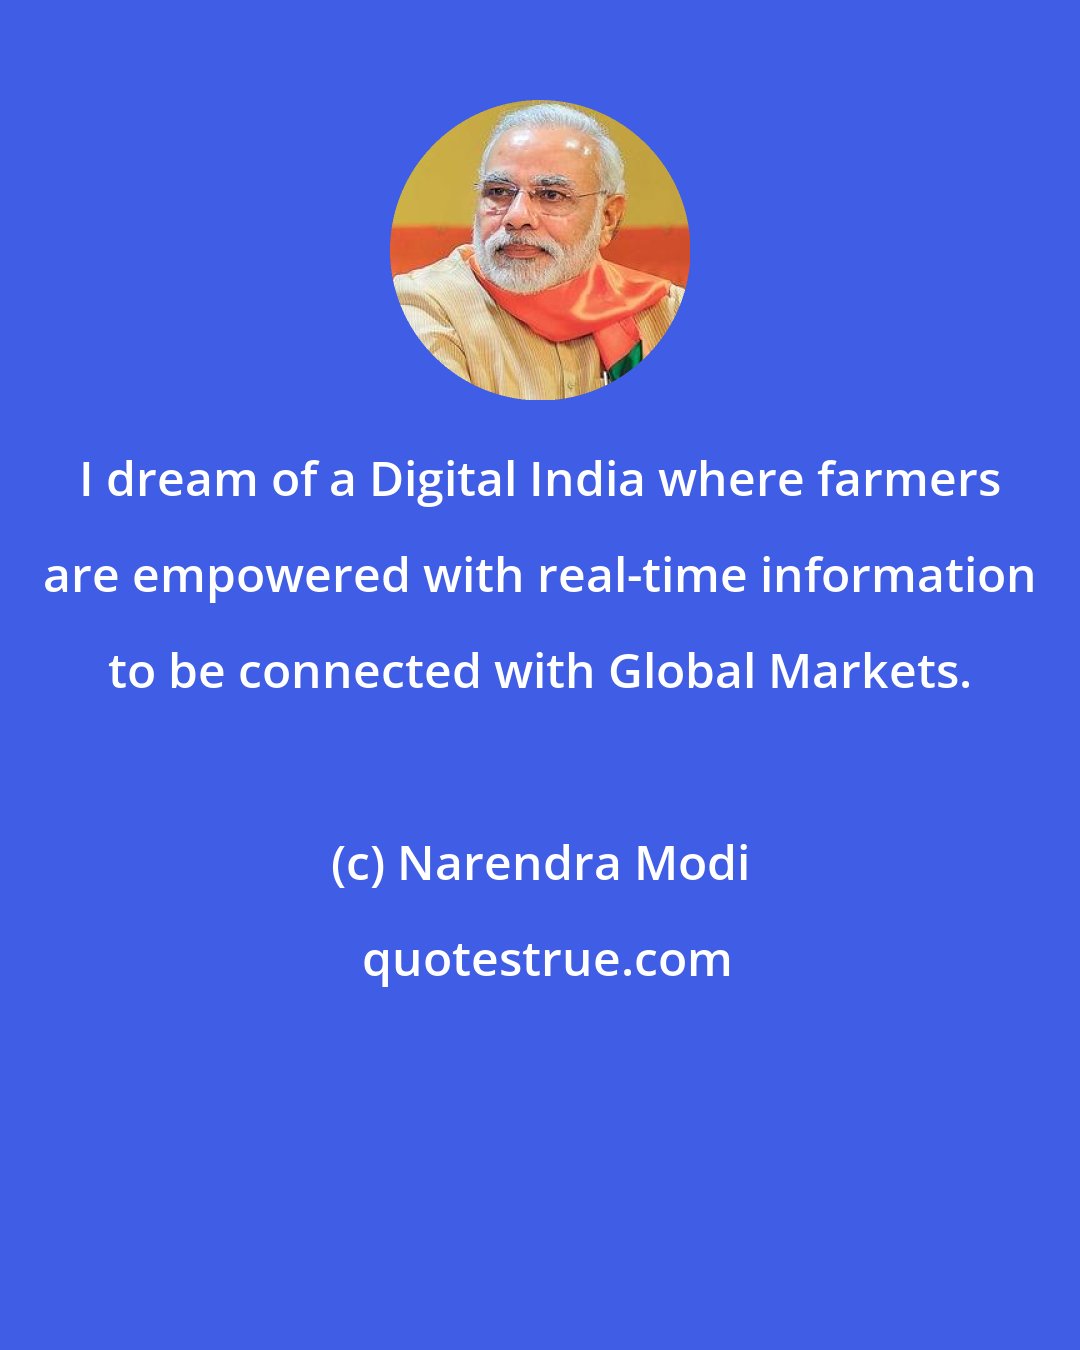 Narendra Modi: I dream of a Digital India where farmers are empowered with real-time information to be connected with Global Markets.